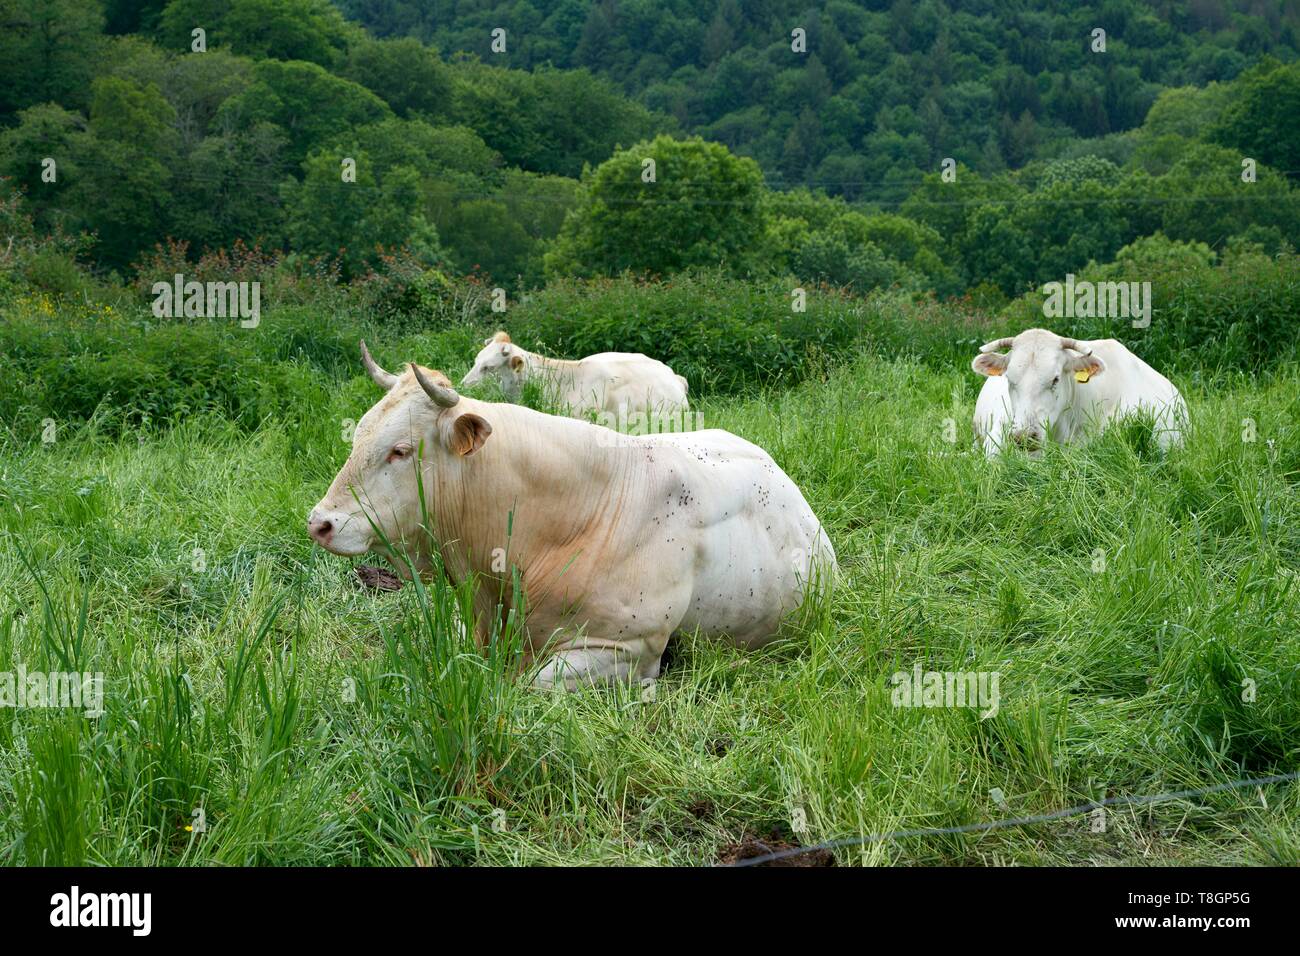 France, Hautes Pyrenees, blond cows of Aquitaine Stock Photo